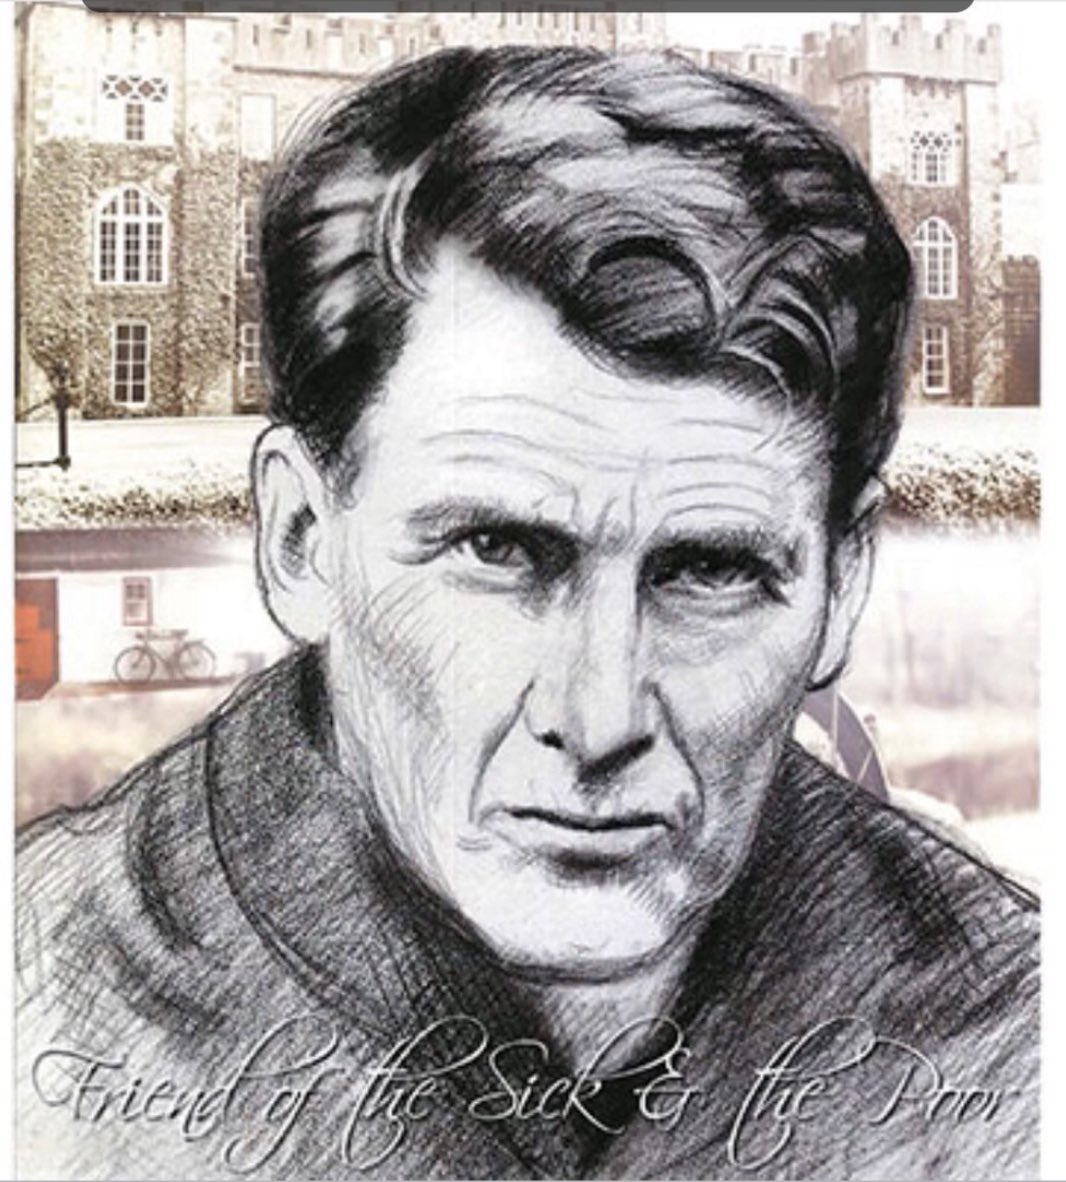 Happy feast of Blessed John Sullivan, the early 20th century Irish Jesuit known for his kindness, gentleness and care of the poor and sick.